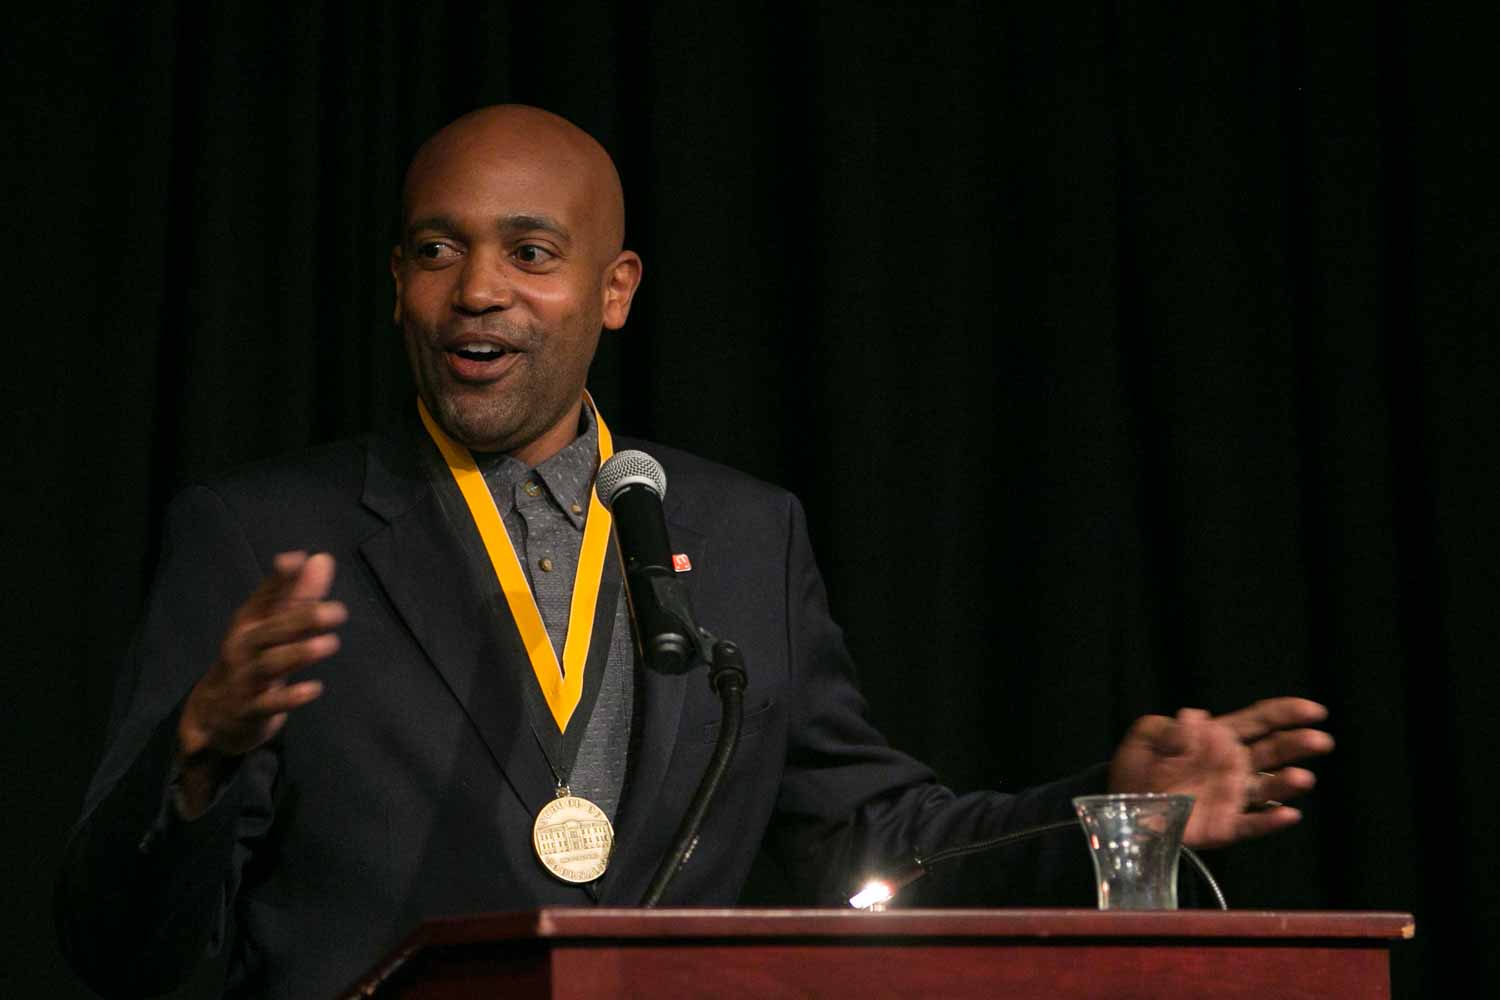 Entrepreneur and activist Lincoln Stephens, BJ '03, delivers his acceptance speech after receiving an honor medal. In November 2008, Stephens decided to quit his job as an advertising account management executive to pursue his passion for mentorship and co-founded a nonprofit organization called The Marcus Graham Project. The organization, which is focused on bringing more diversity to the advertising industry through mentorship, exposure and career development, has been featured in Advertising Age, Black Enterprise magazine, Savoy magazine, and on CNN and NBC. Additionally, Stephens was named one of Advertising Age’s “40 under 40″ marketing leaders in 2013 and previously was featured in Ebony magazine as one of the top entrepreneurs in the country under the age of 34.